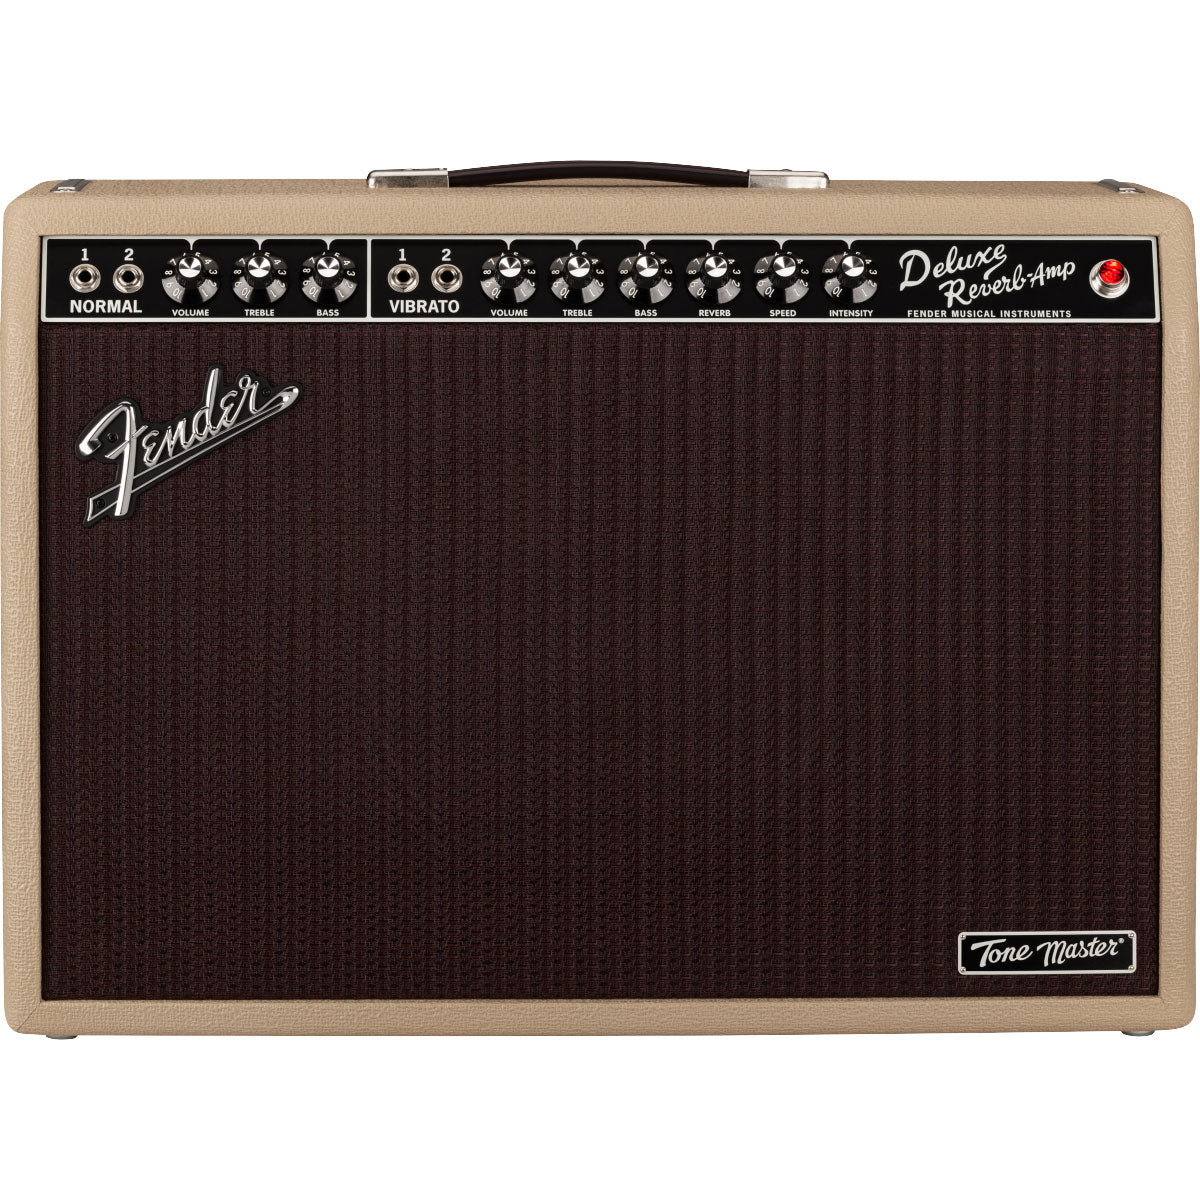 Front view of Fender Tone Master Deluxe Reverb Blonde Guitar Amplifier